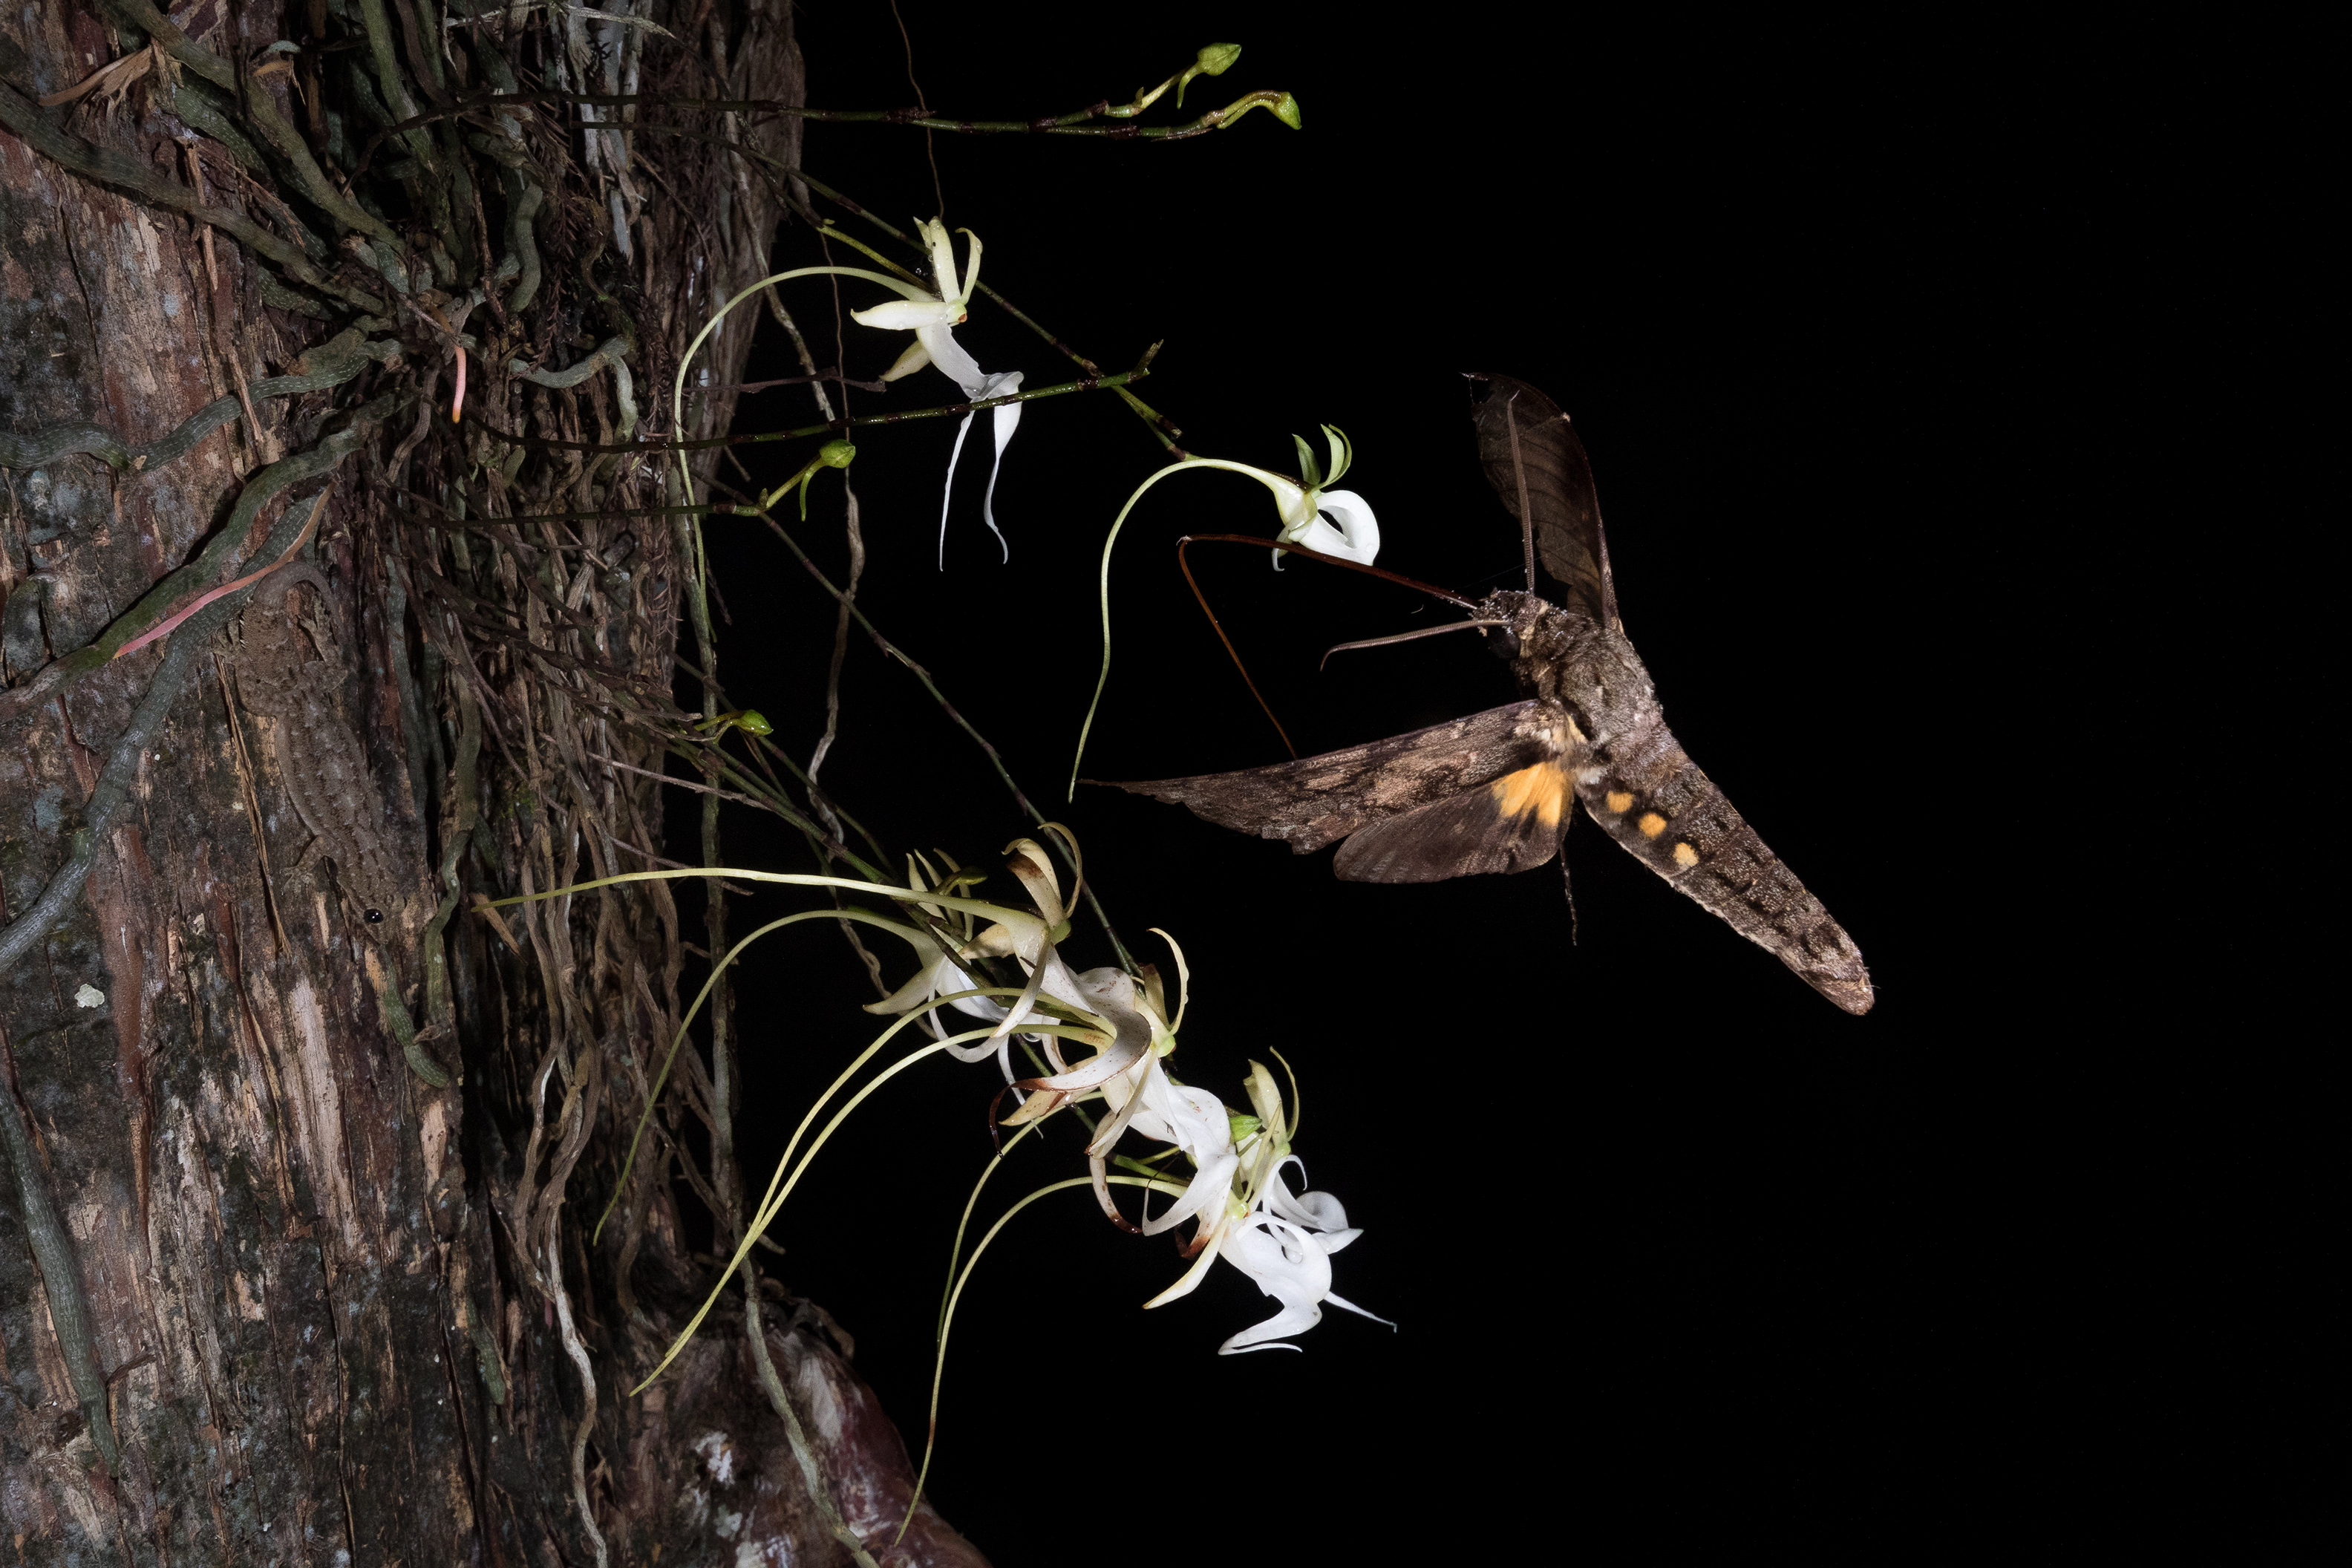 A moth in flight with flowers